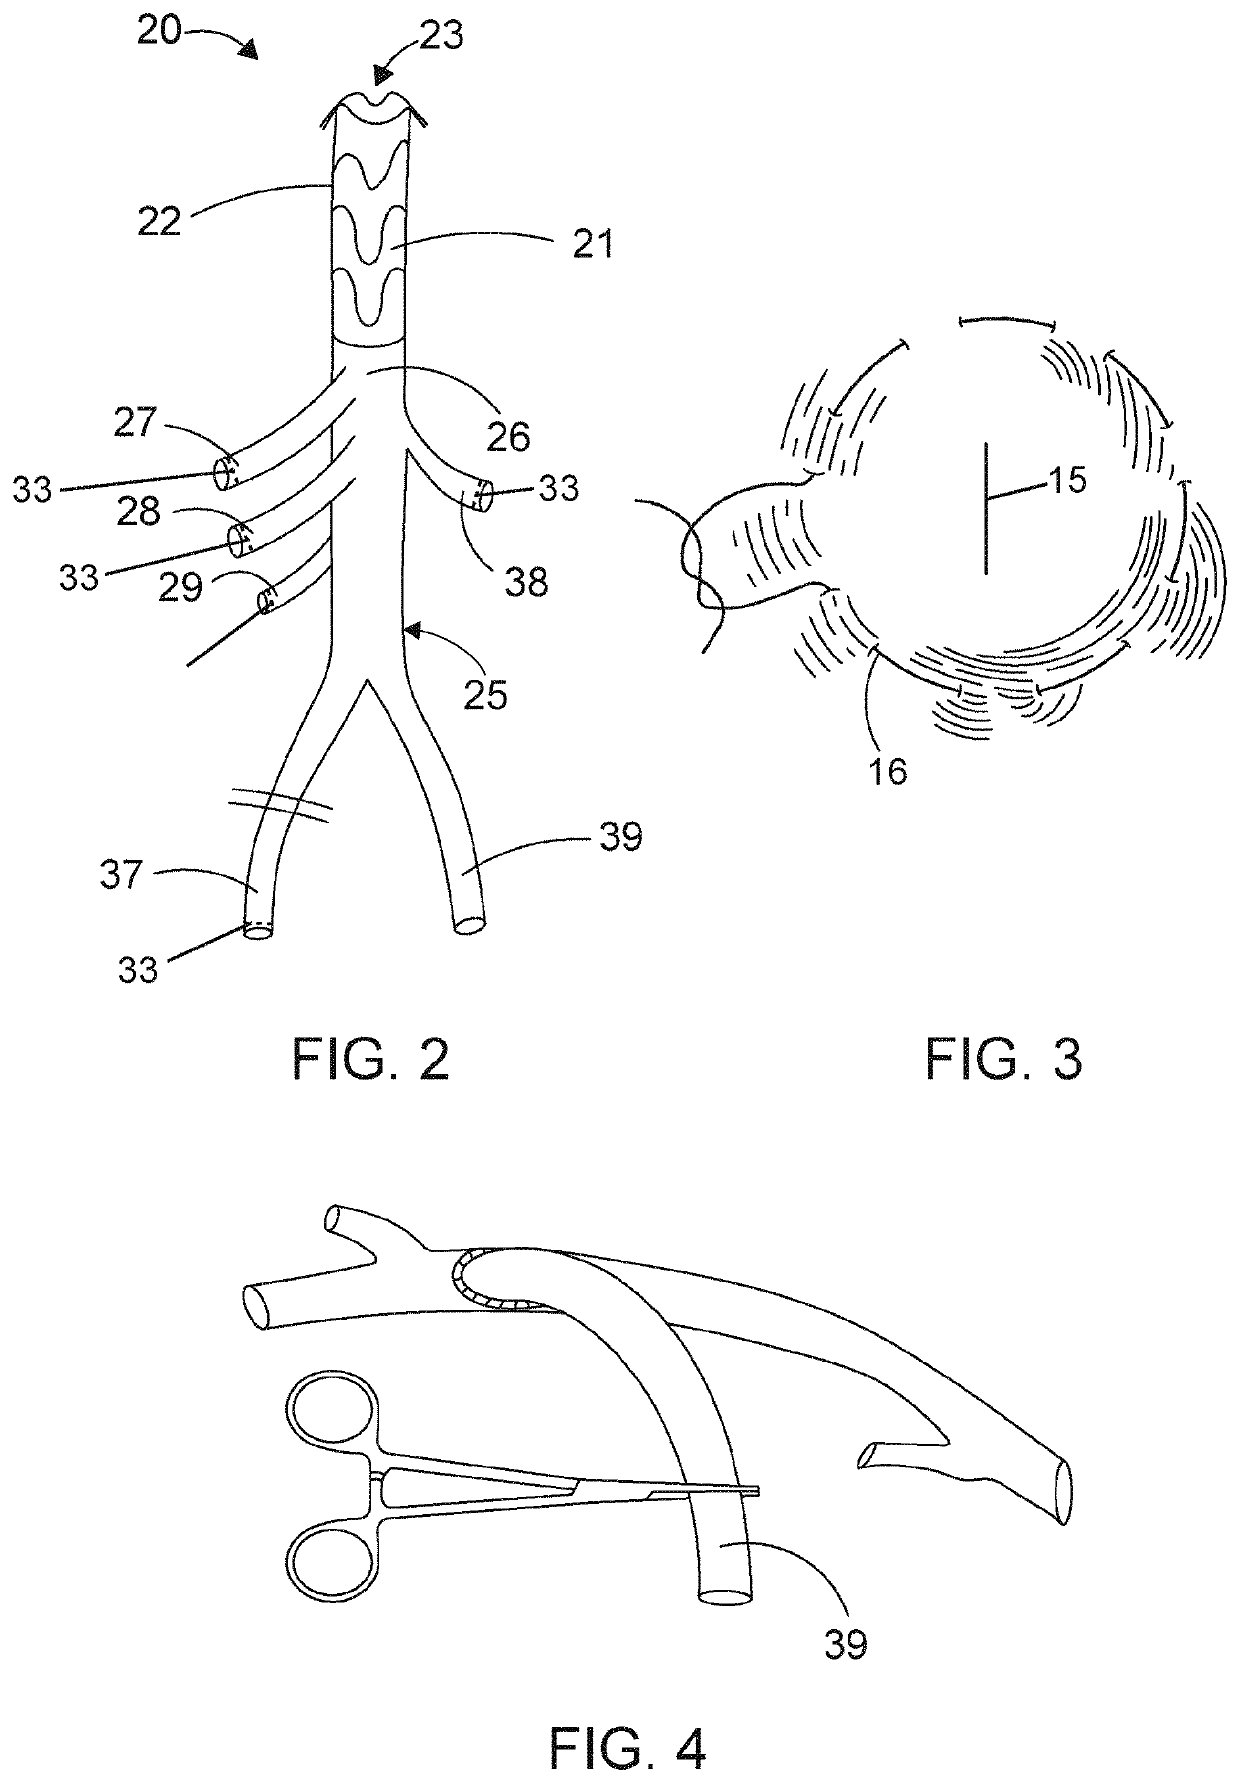 Hybrid prosthesis and delivery system